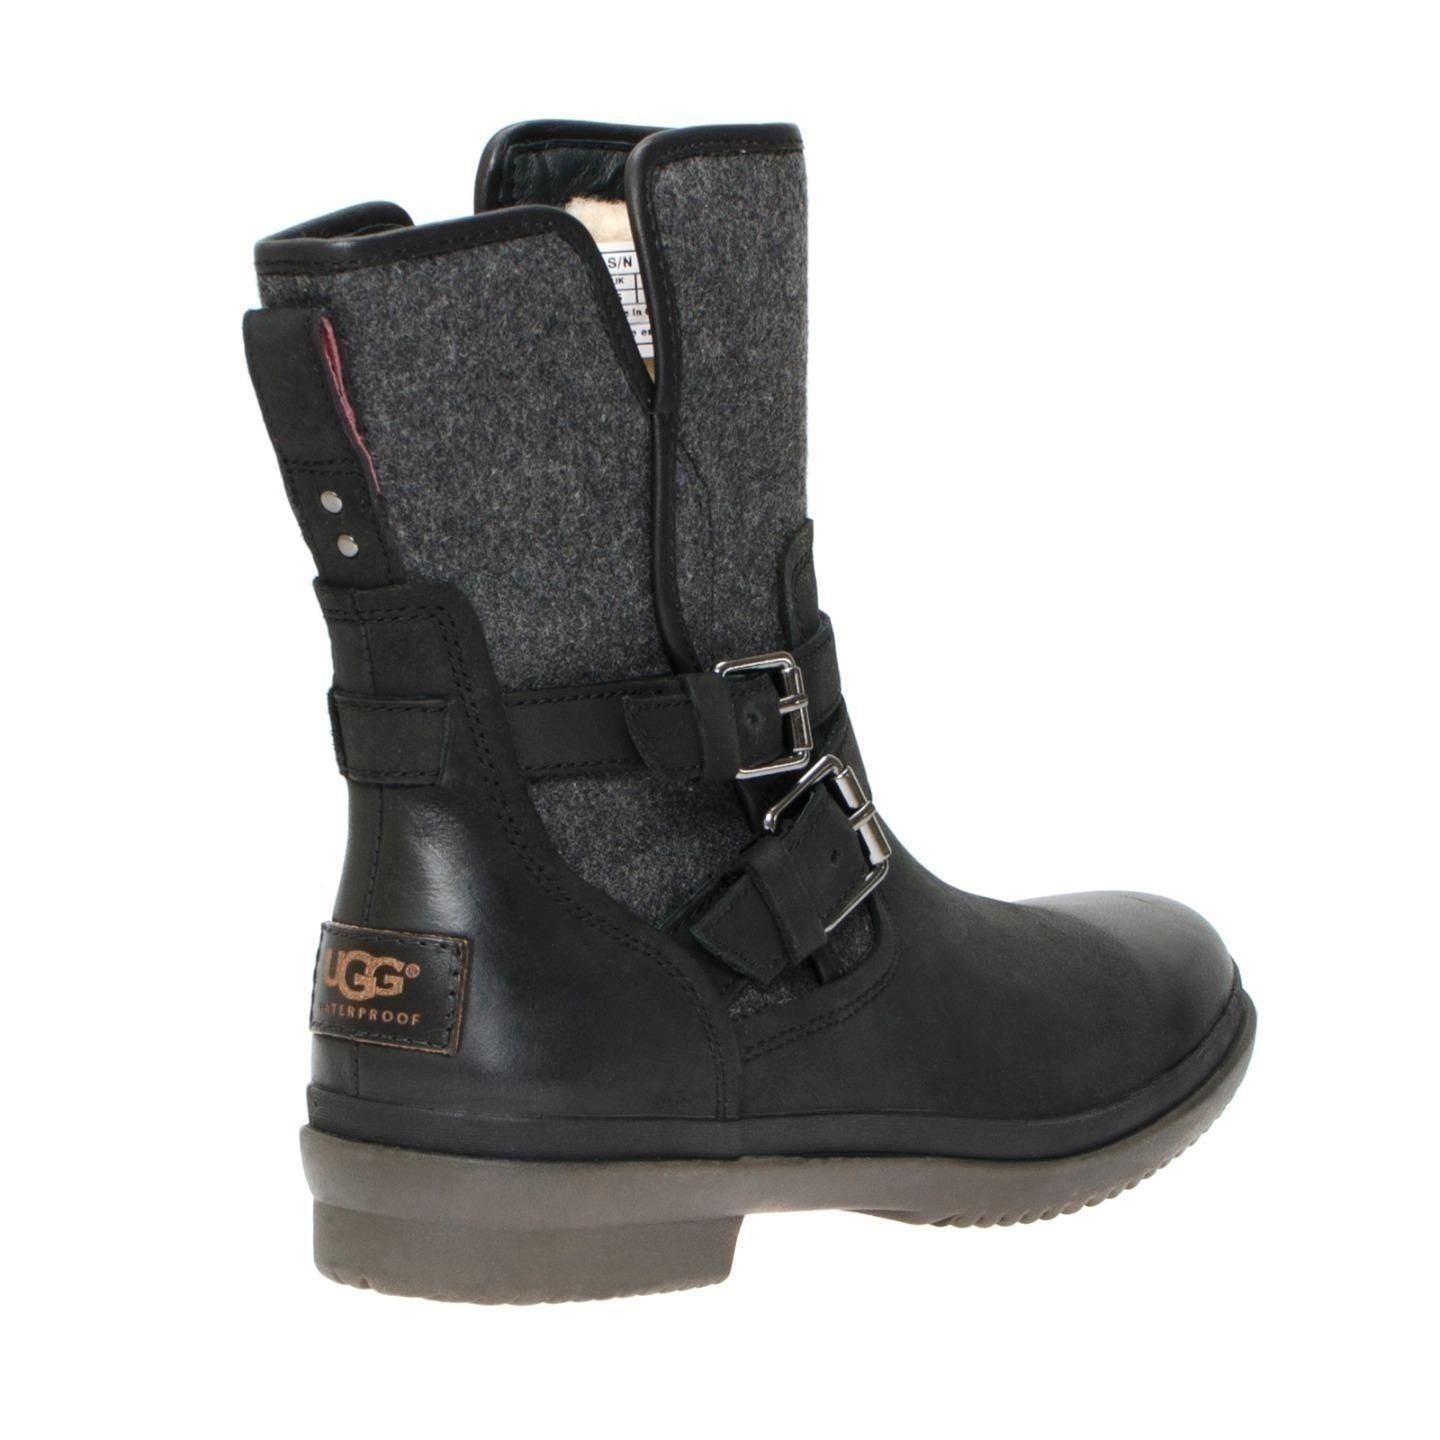 ugg simmens boot black size 8